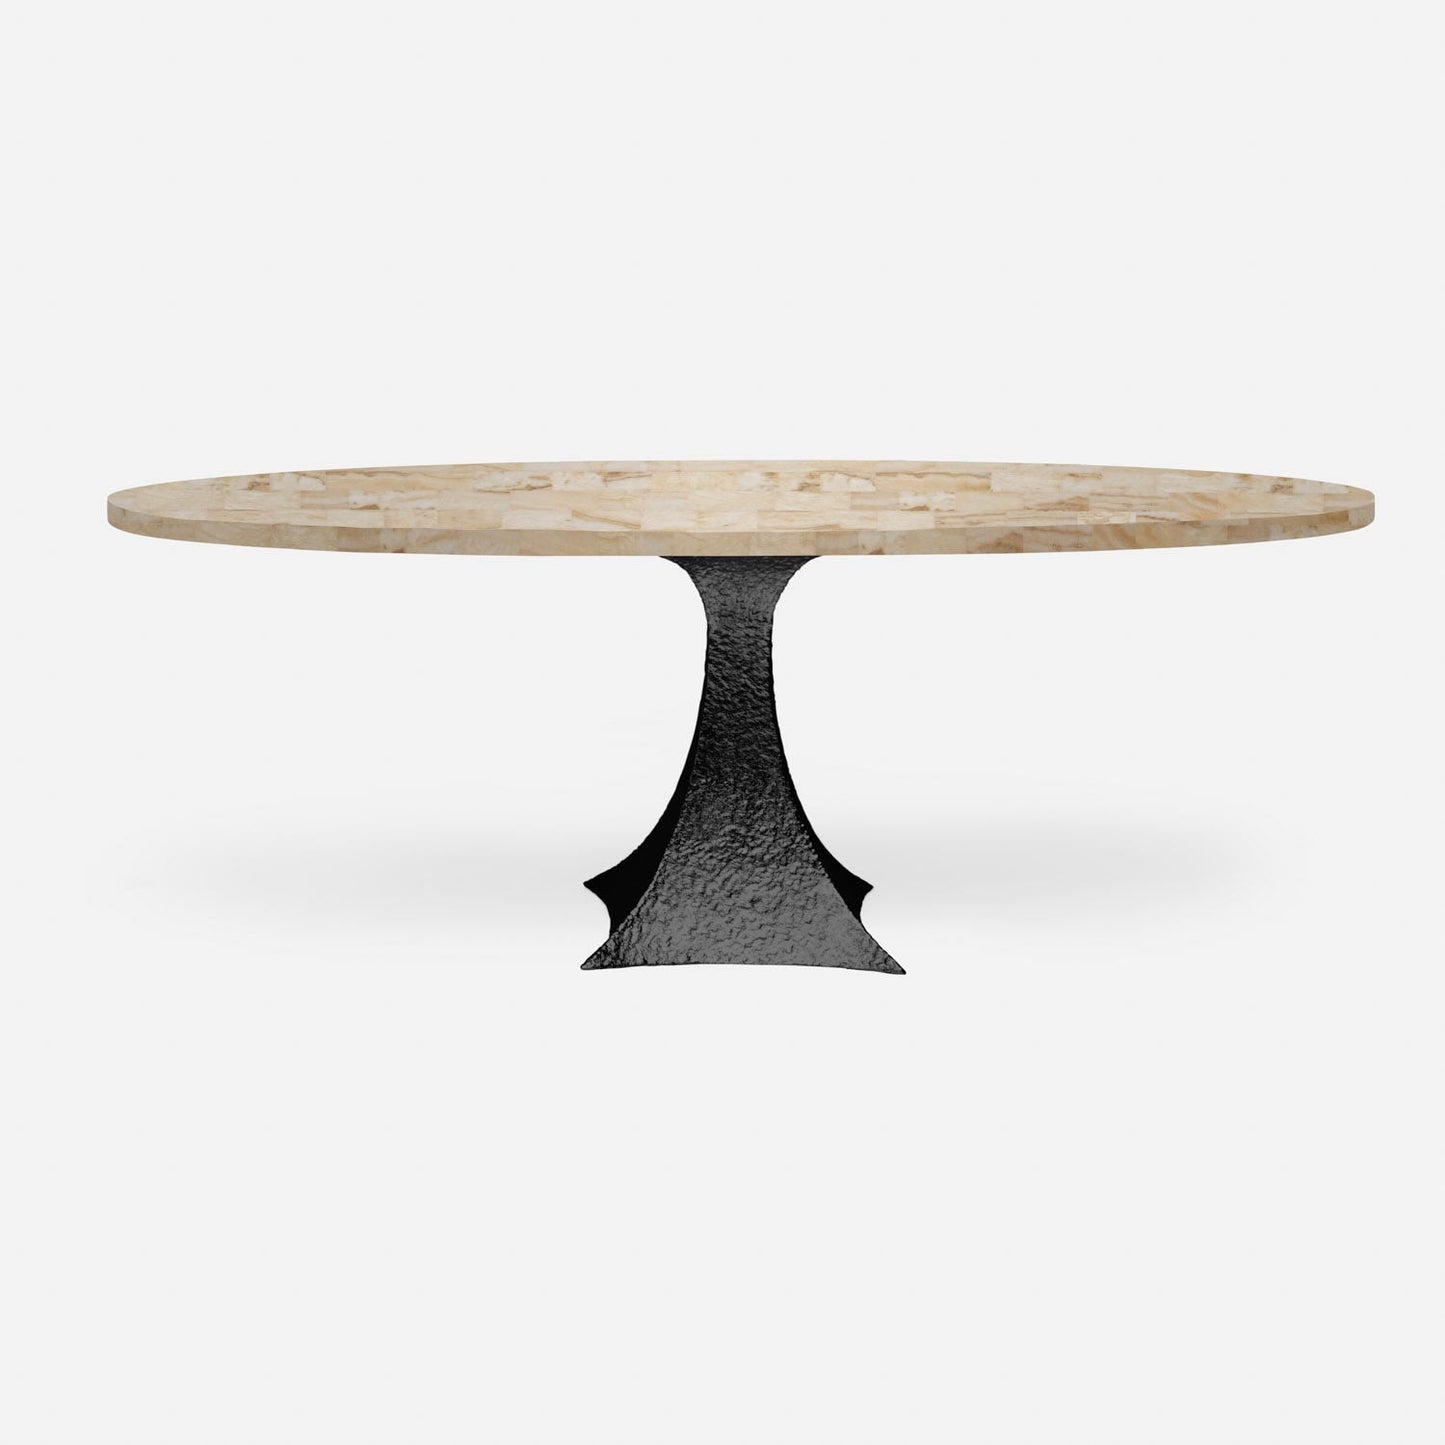 Made Goods Noor 96" x 44" x 30" Double Base Bumpy Black Iron Dinning Table With Oval Beige Crystal Stone Table Top